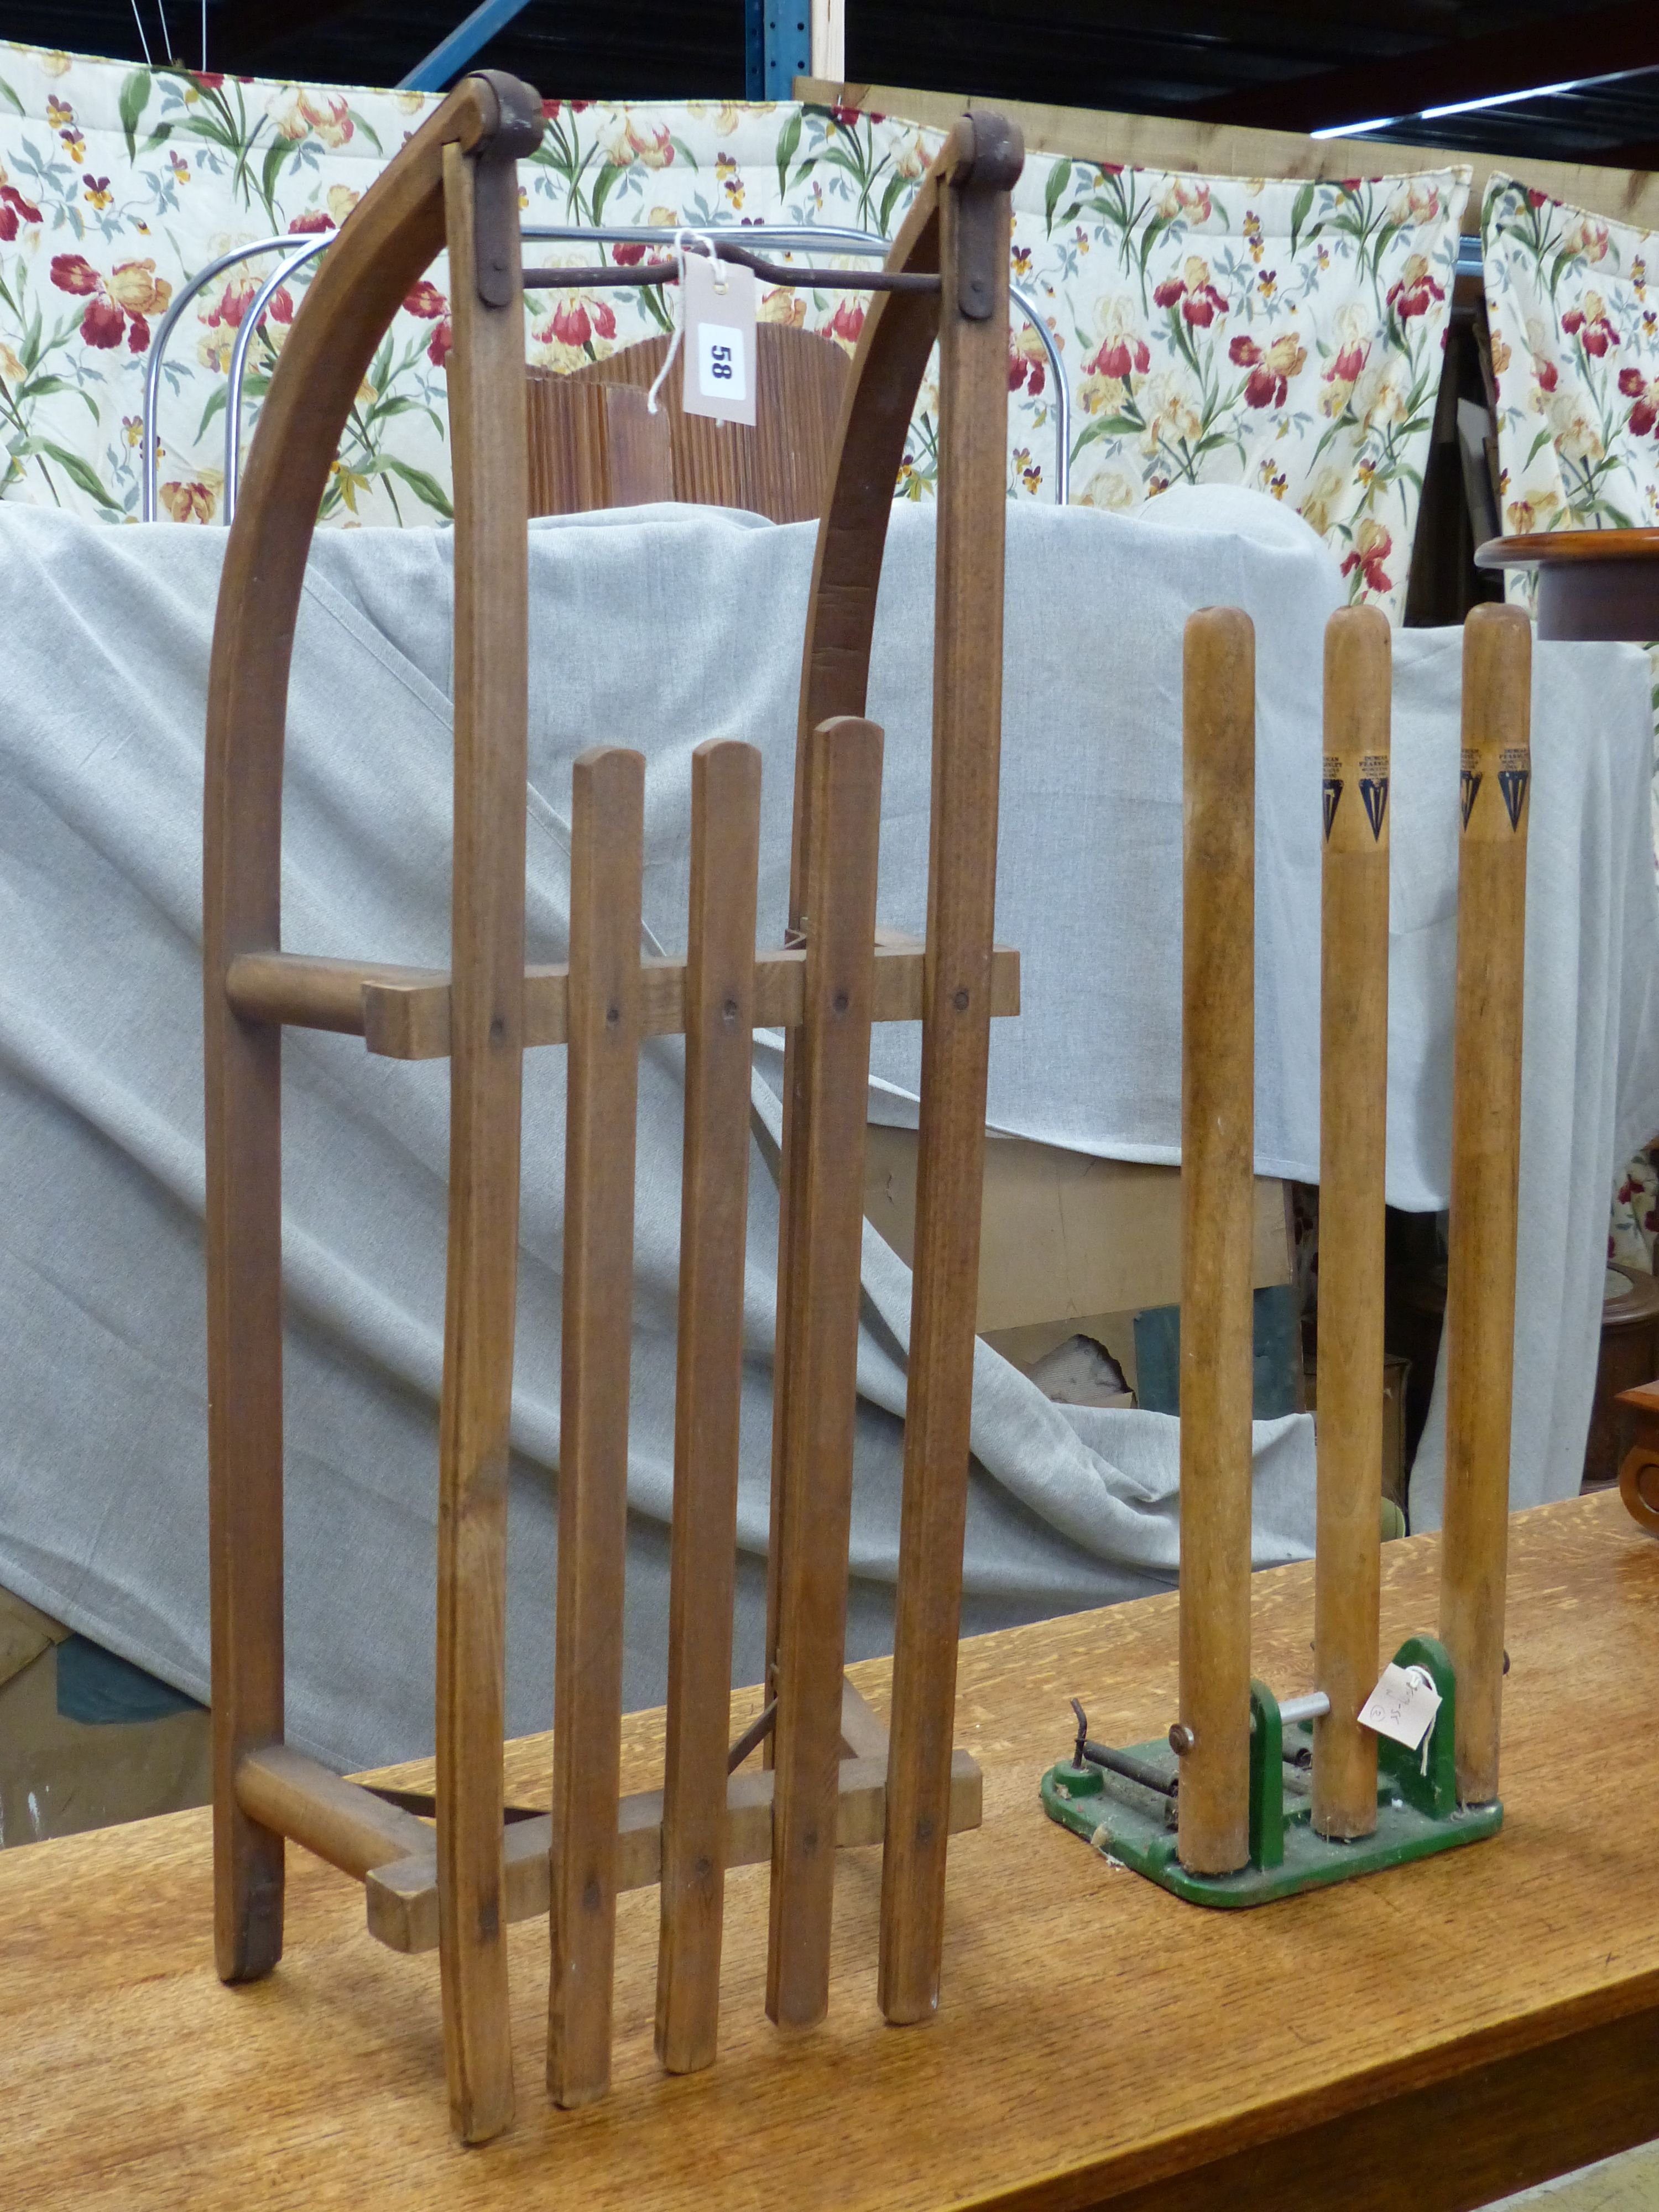 A vintage sled, a set of practise cricket stumps on sprung cast iron base